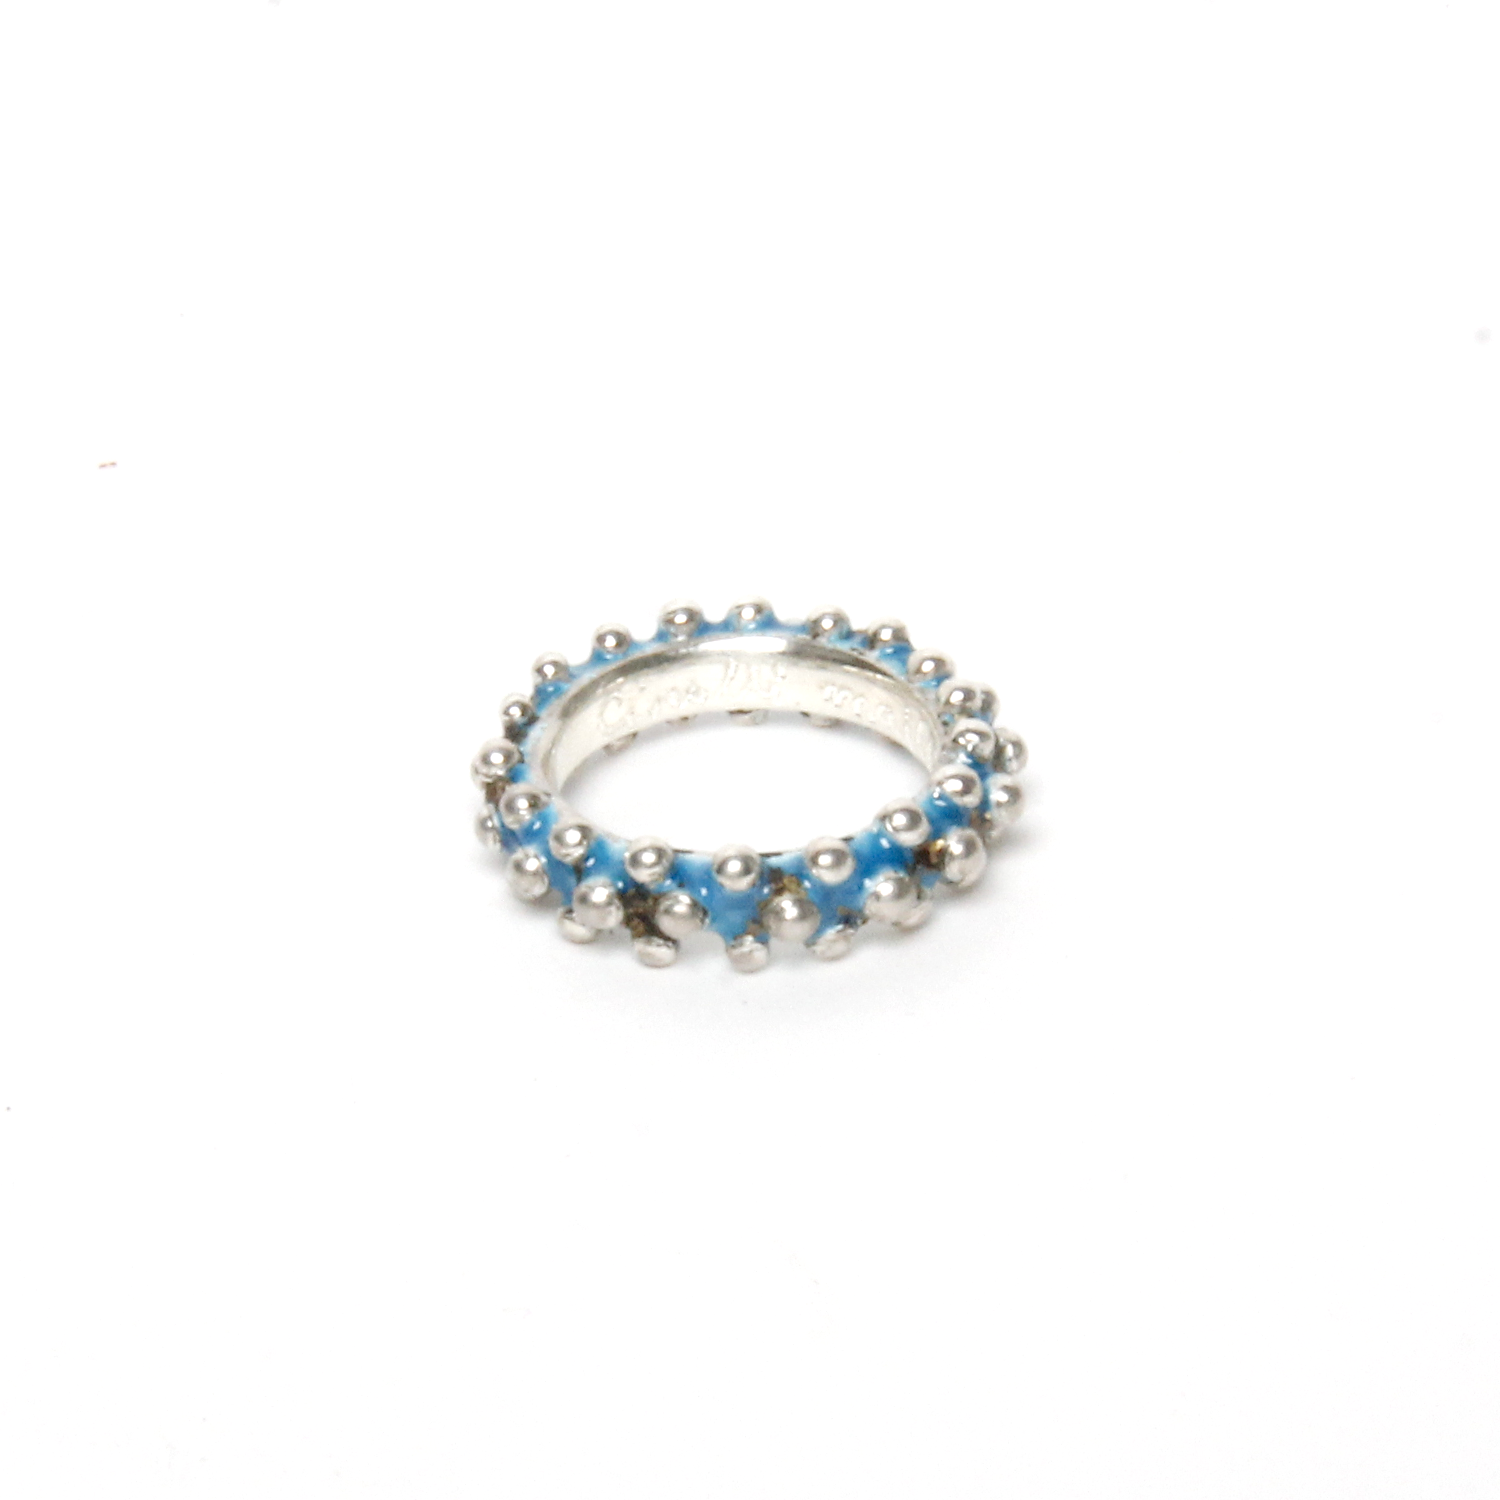 Cinelli Maillet: Blowfish Eternity Ring in Turquoise Product Image 1 of 3